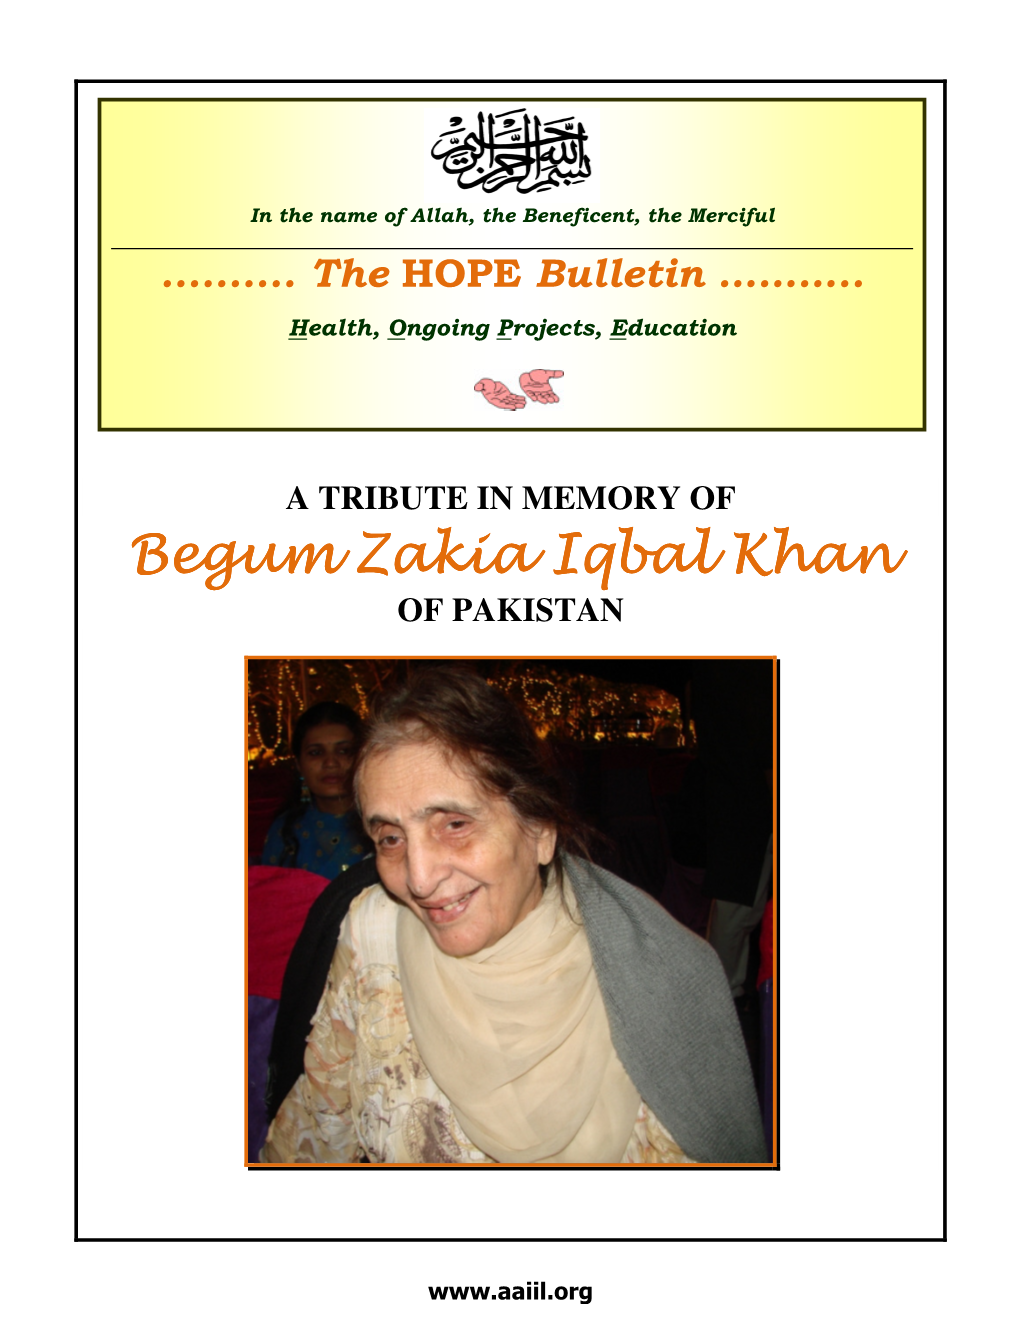 The HOPE Bulletin: March 2012 Supplement (A Tribute in Memory Of